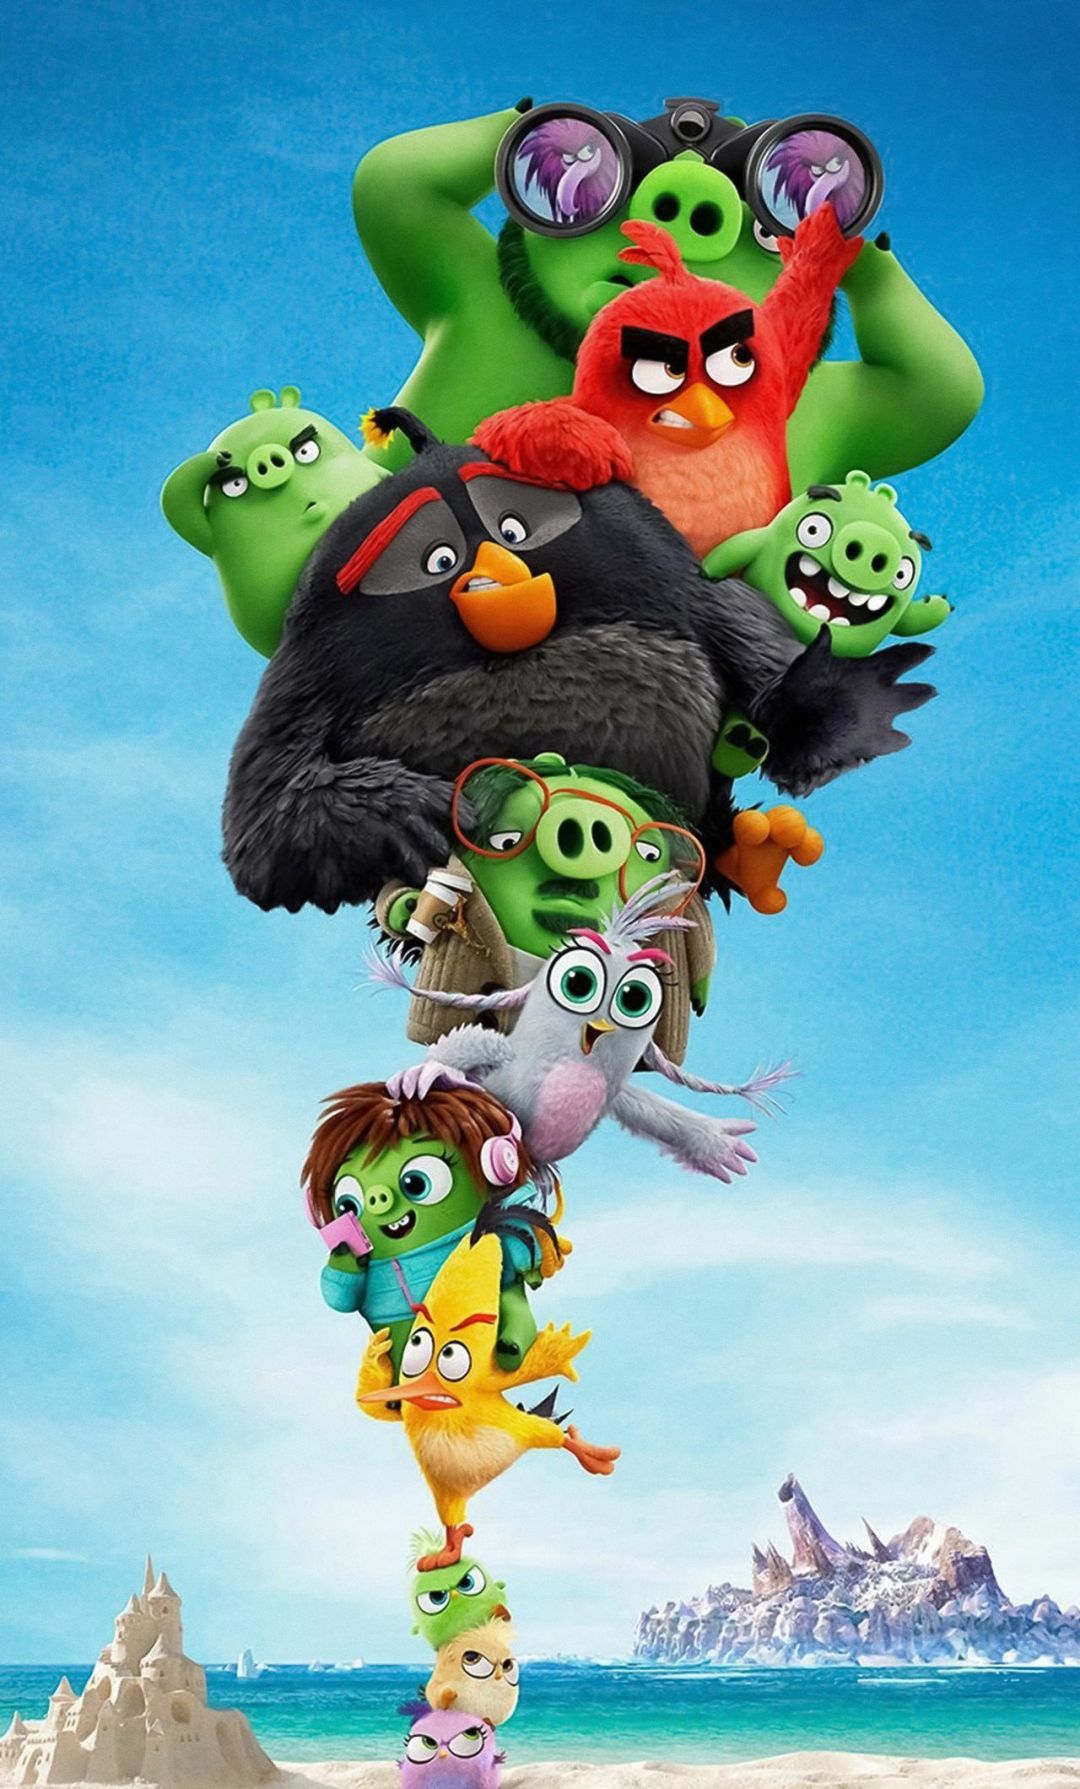 ✓[95+] The Angry Birds Movie 2 Wallpaper - Android / iPhone HD Wallpaper  Background Download (png / jpg) (2023)